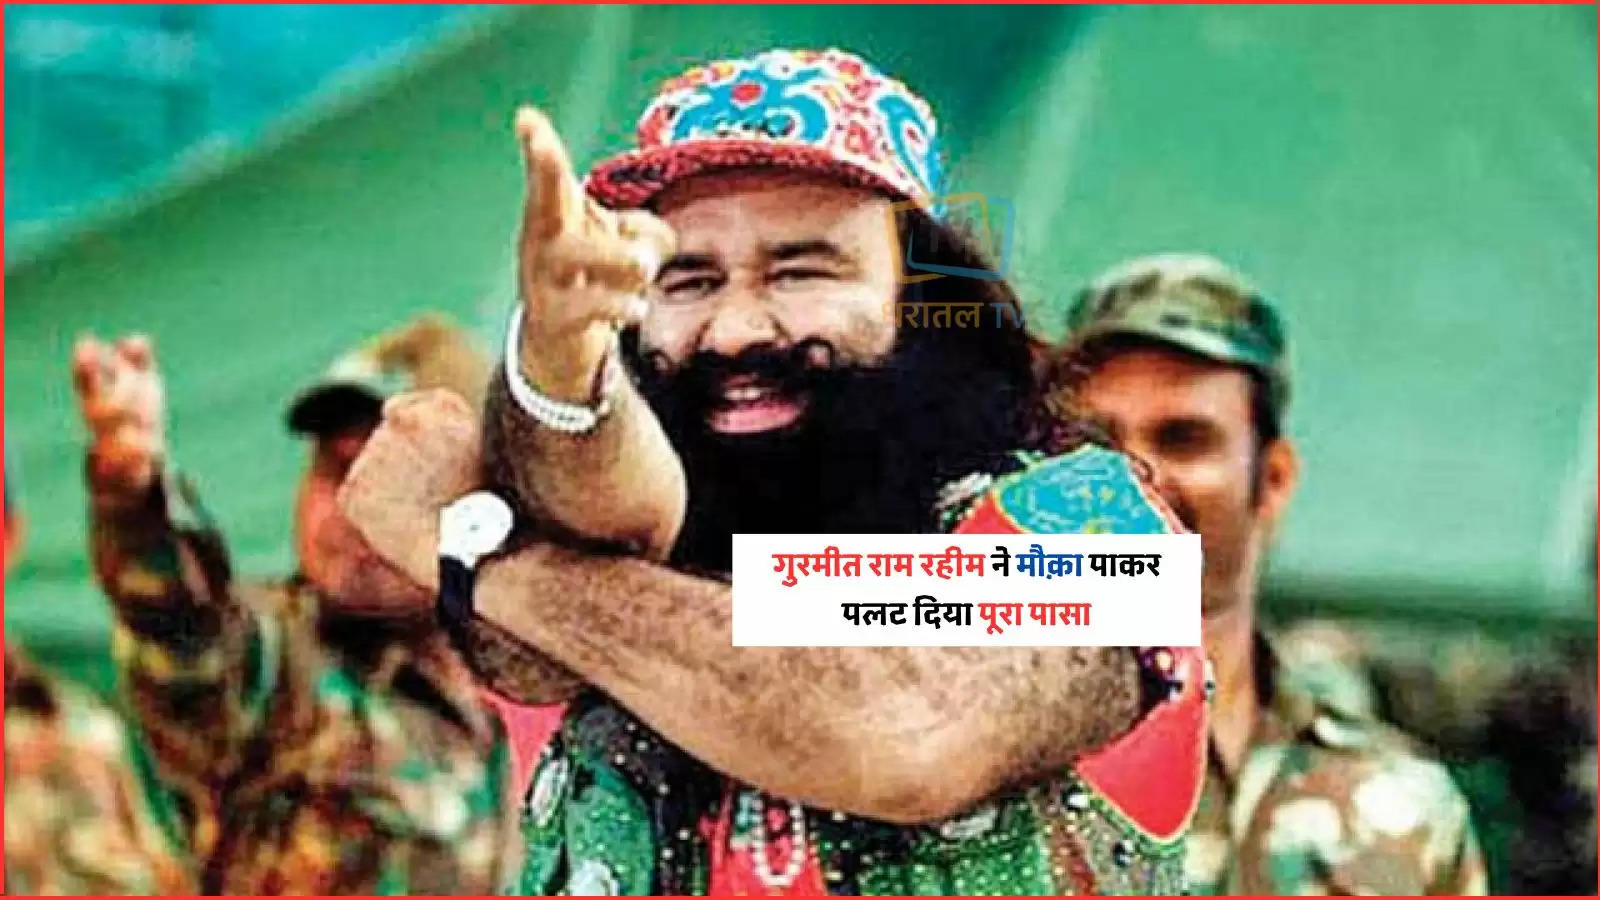 Gurmeet Ram Rahim turned the tide after getting a chance